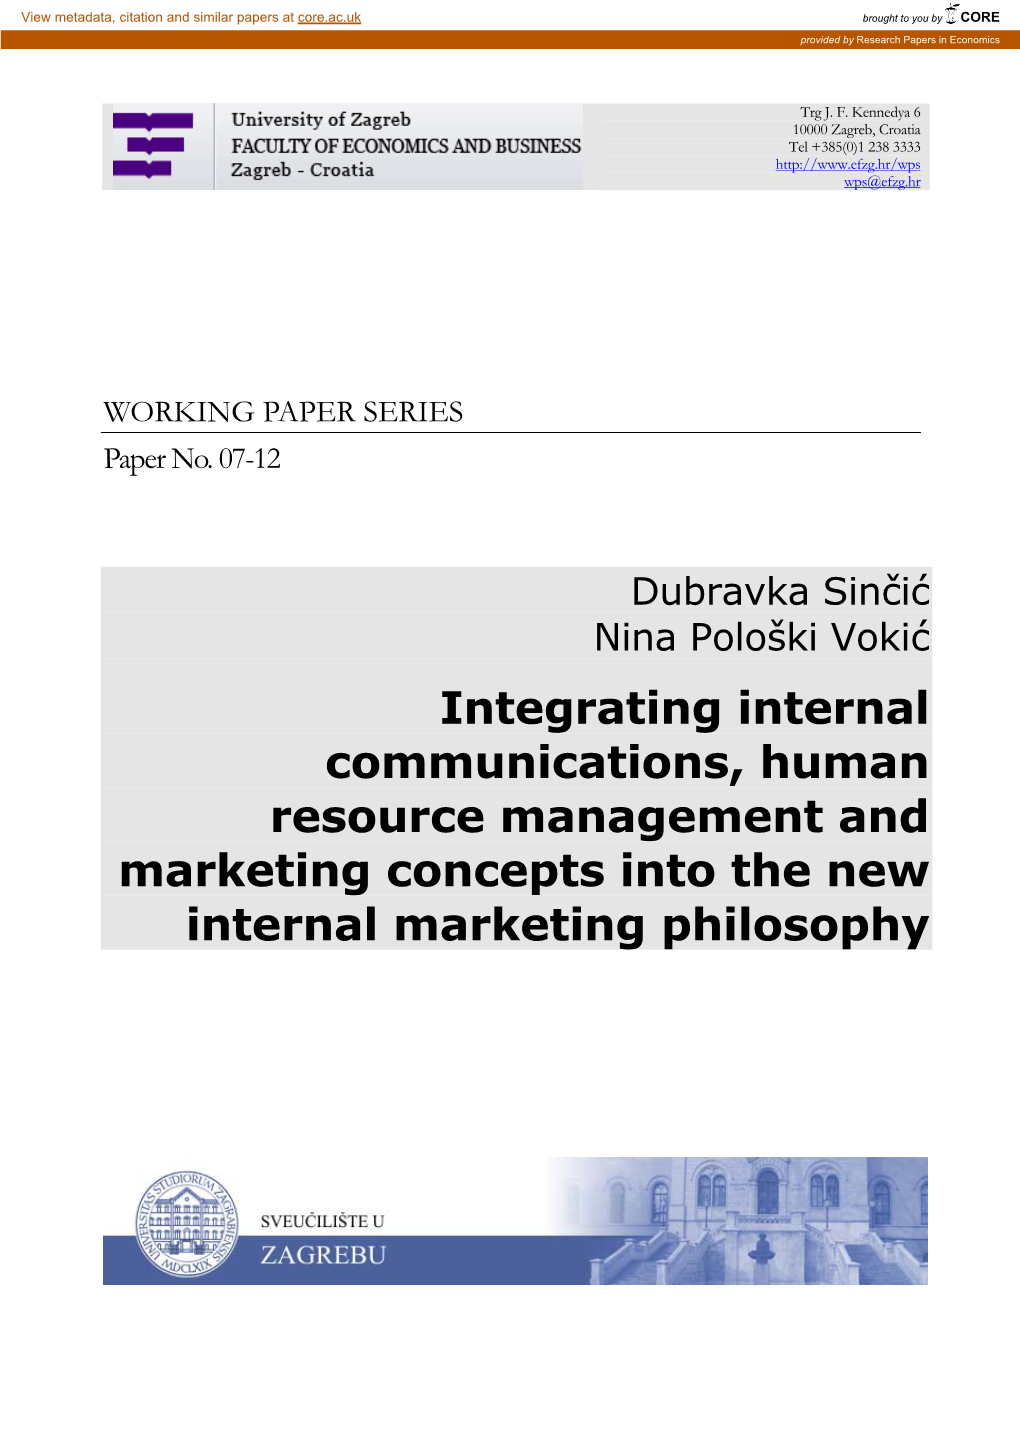 Integrating Internal Communications, Human Resource Management and Marketing Concepts Into the New Internal Marketing Philosophy